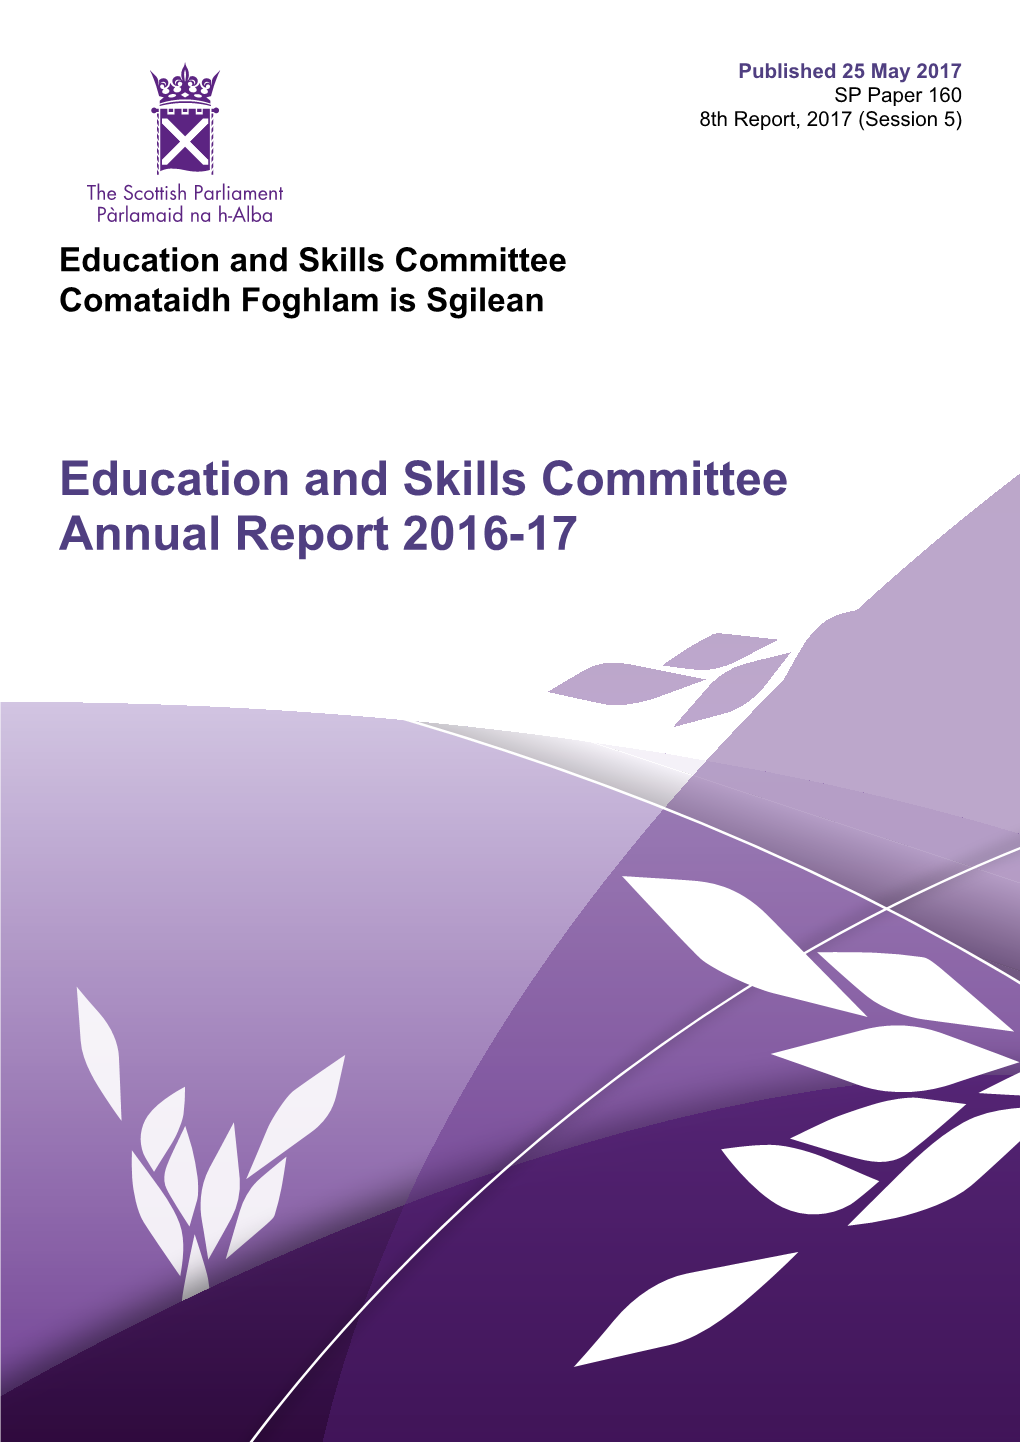 Education and Skills Committee Annual Report 2016-17 Published in Scotland by the Scottish Parliamentary Corporate Body